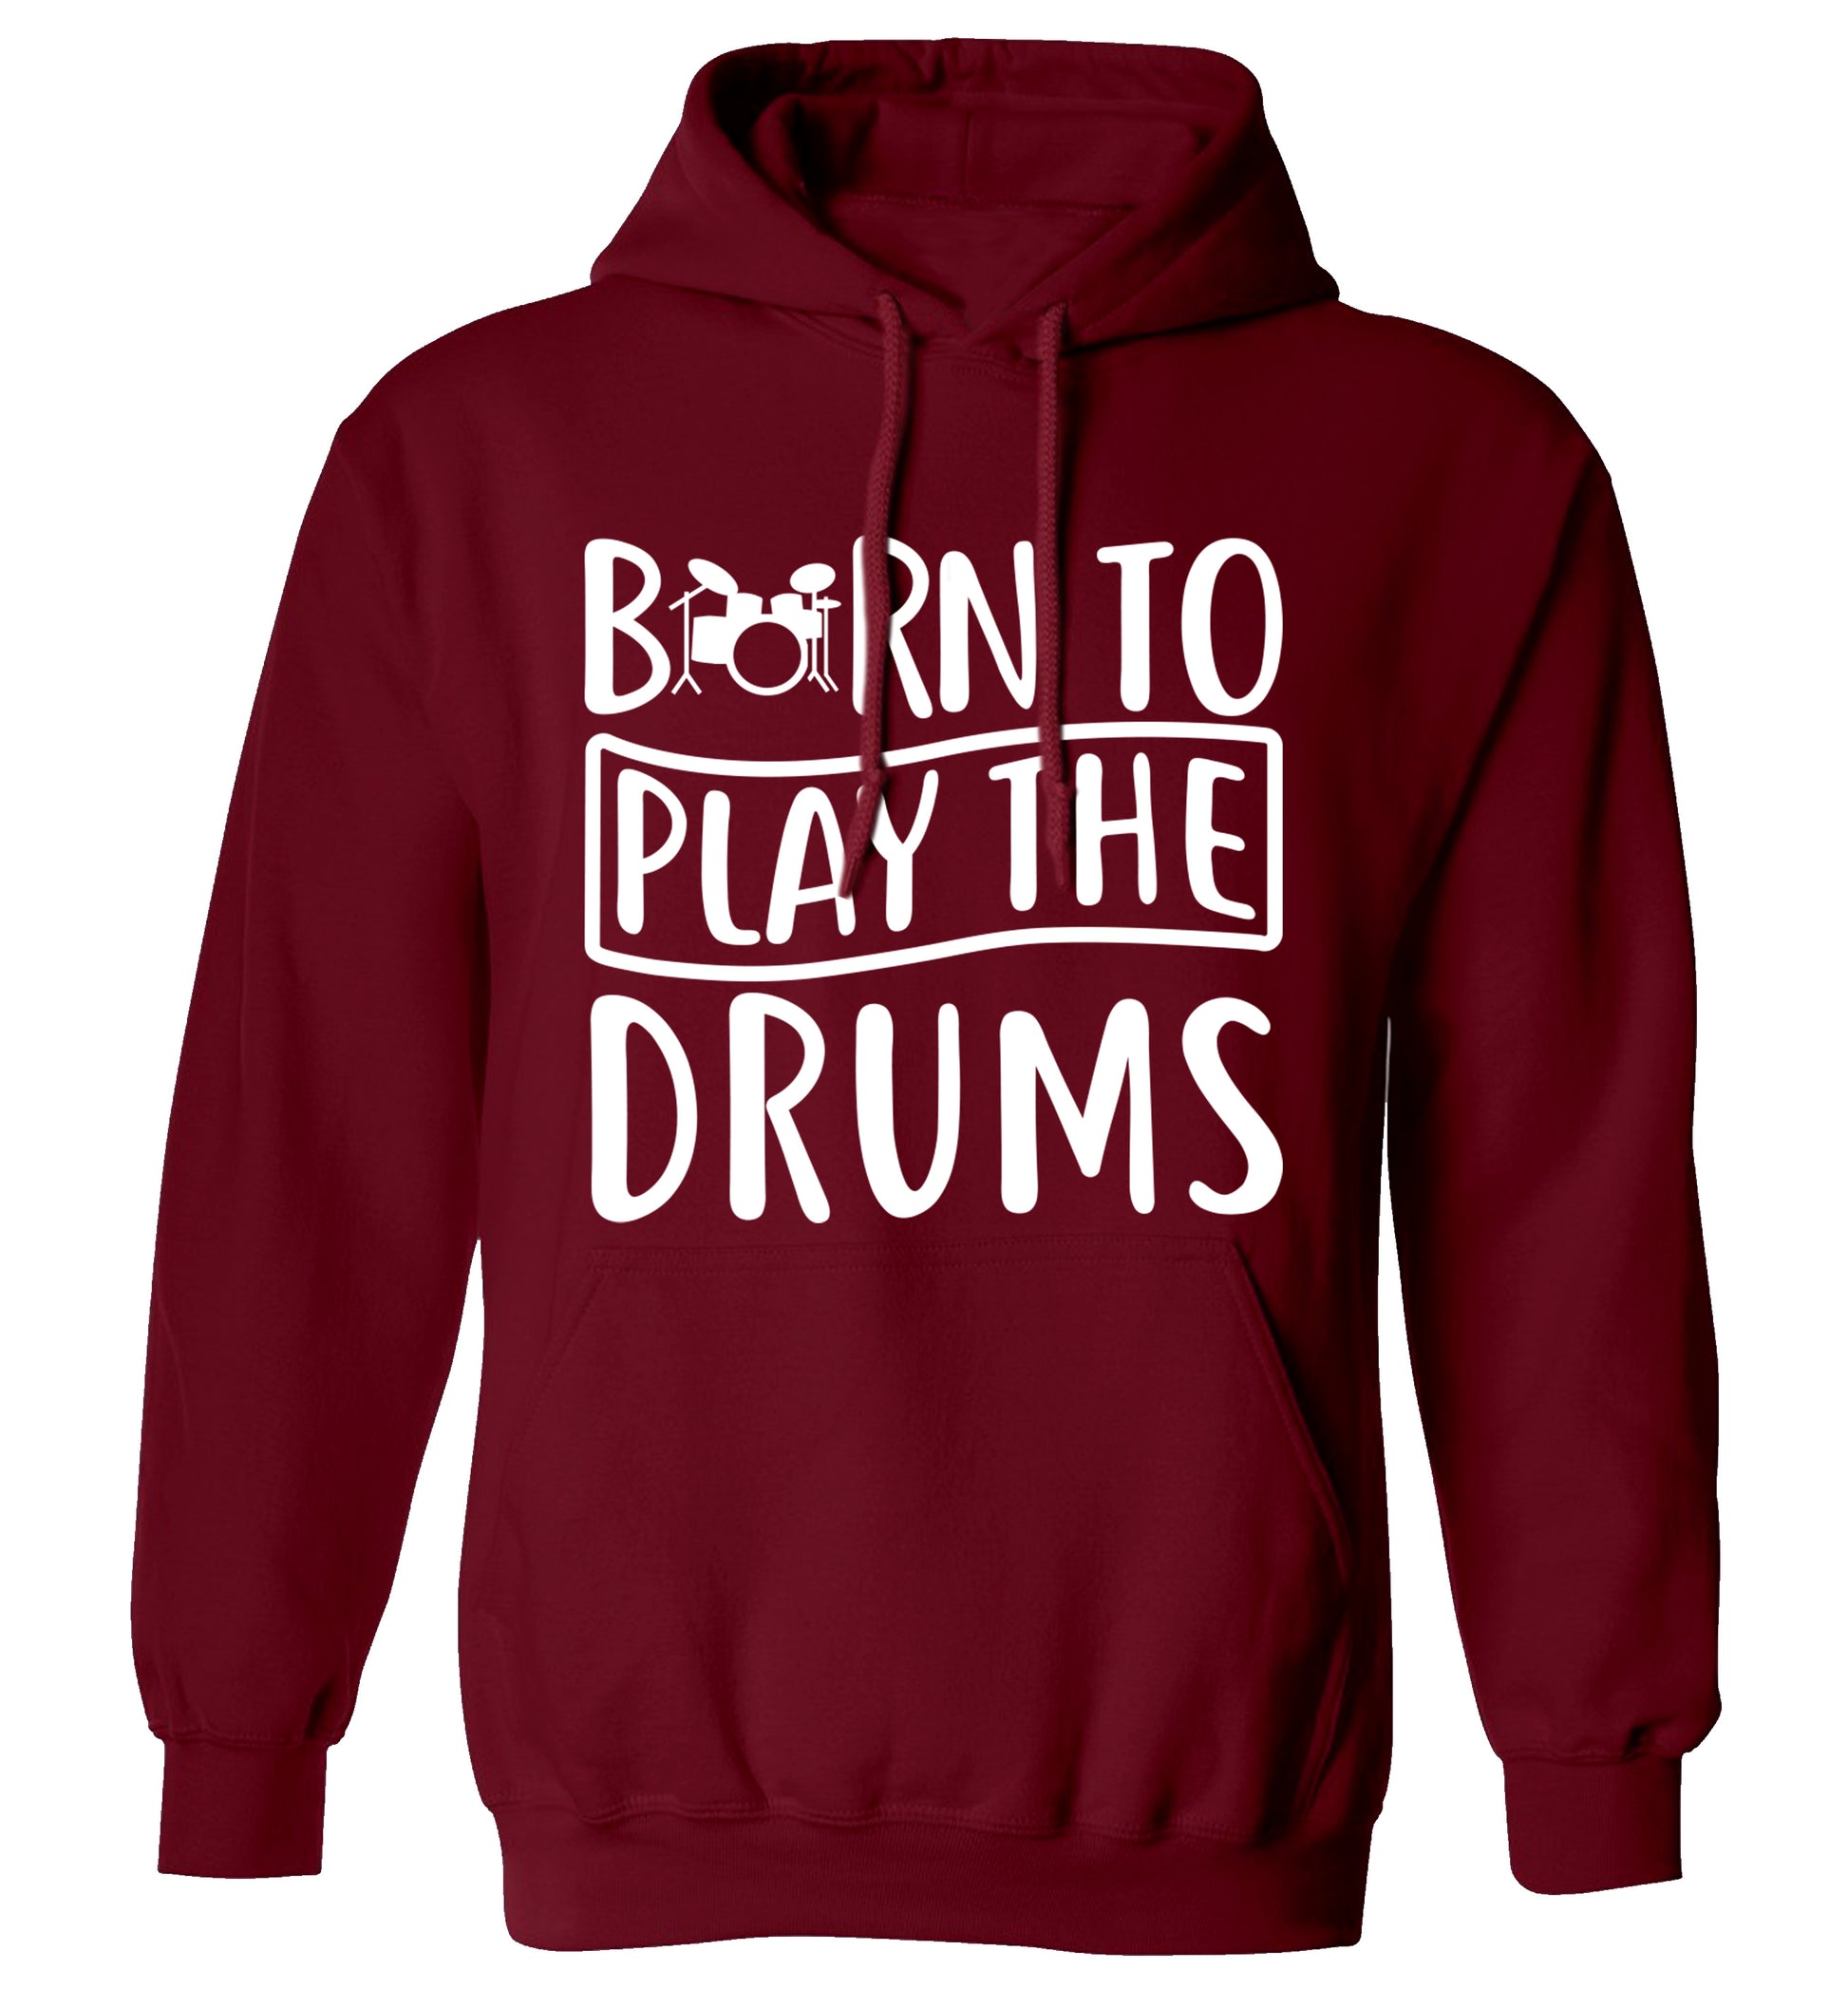 Born to play the drums adults unisex maroon hoodie 2XL